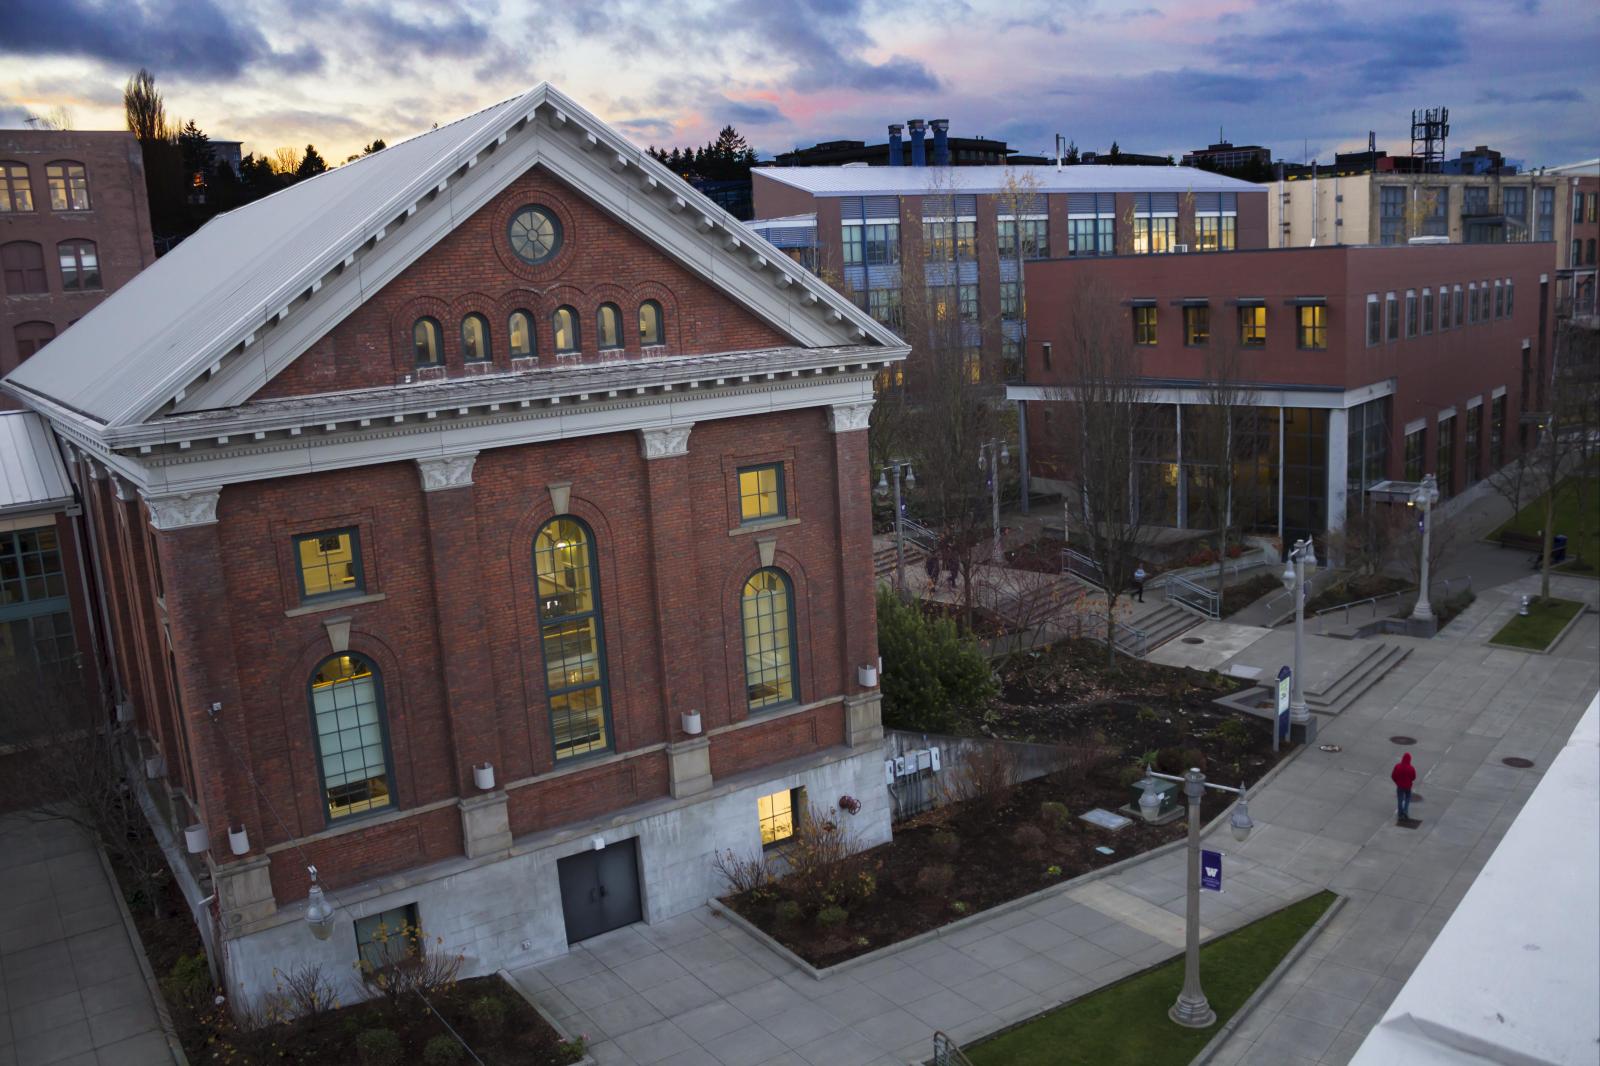 The Snoqualmie Building, built as a power substation, shown here as the UW Tacoma library reading room 